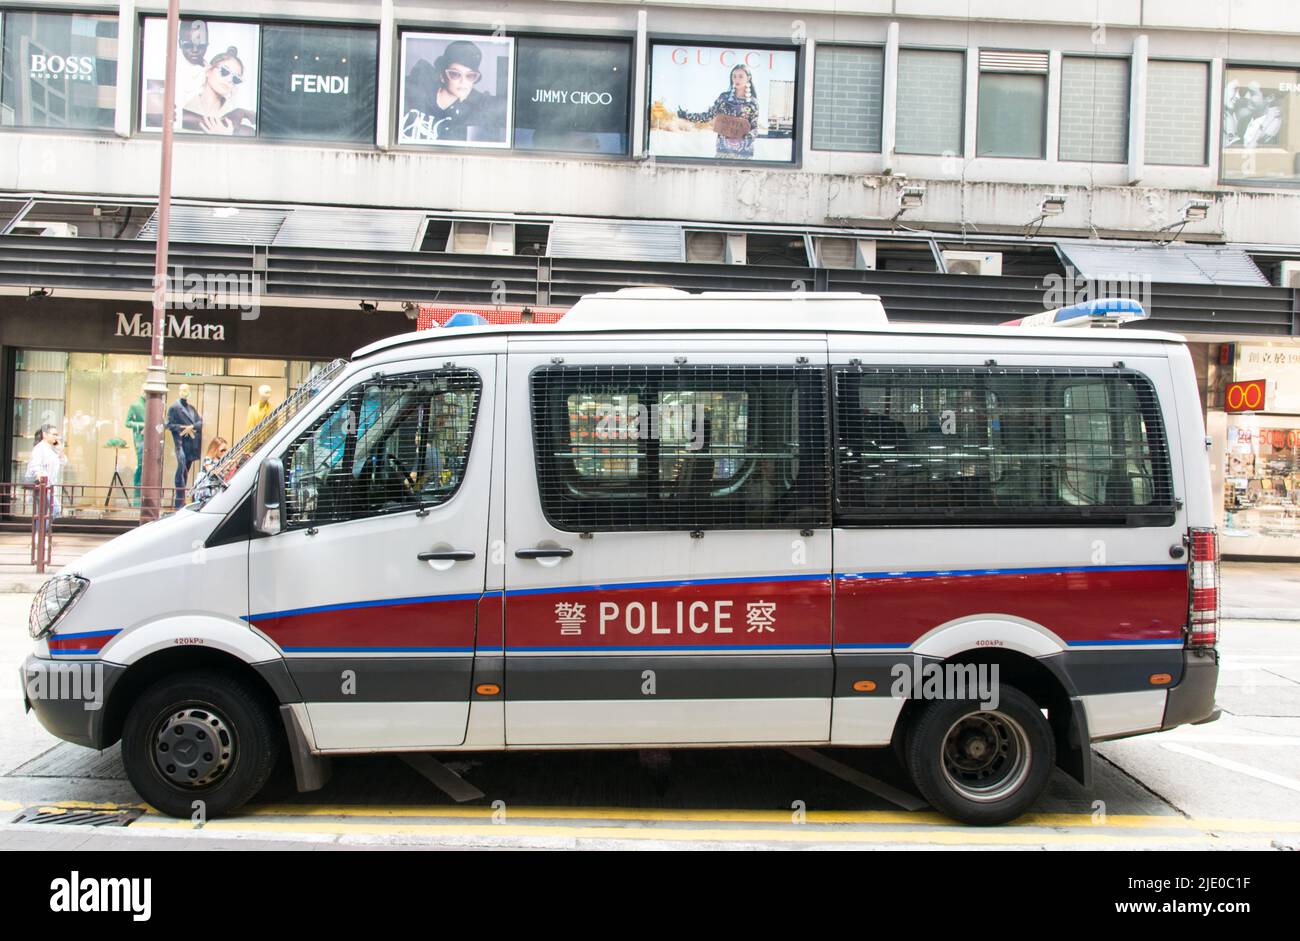 Hong Kong police vehicle on Peking road in Kowloon. the vehicle is Mercedes-Benz van and The windows are protected by bars. Stock Photo